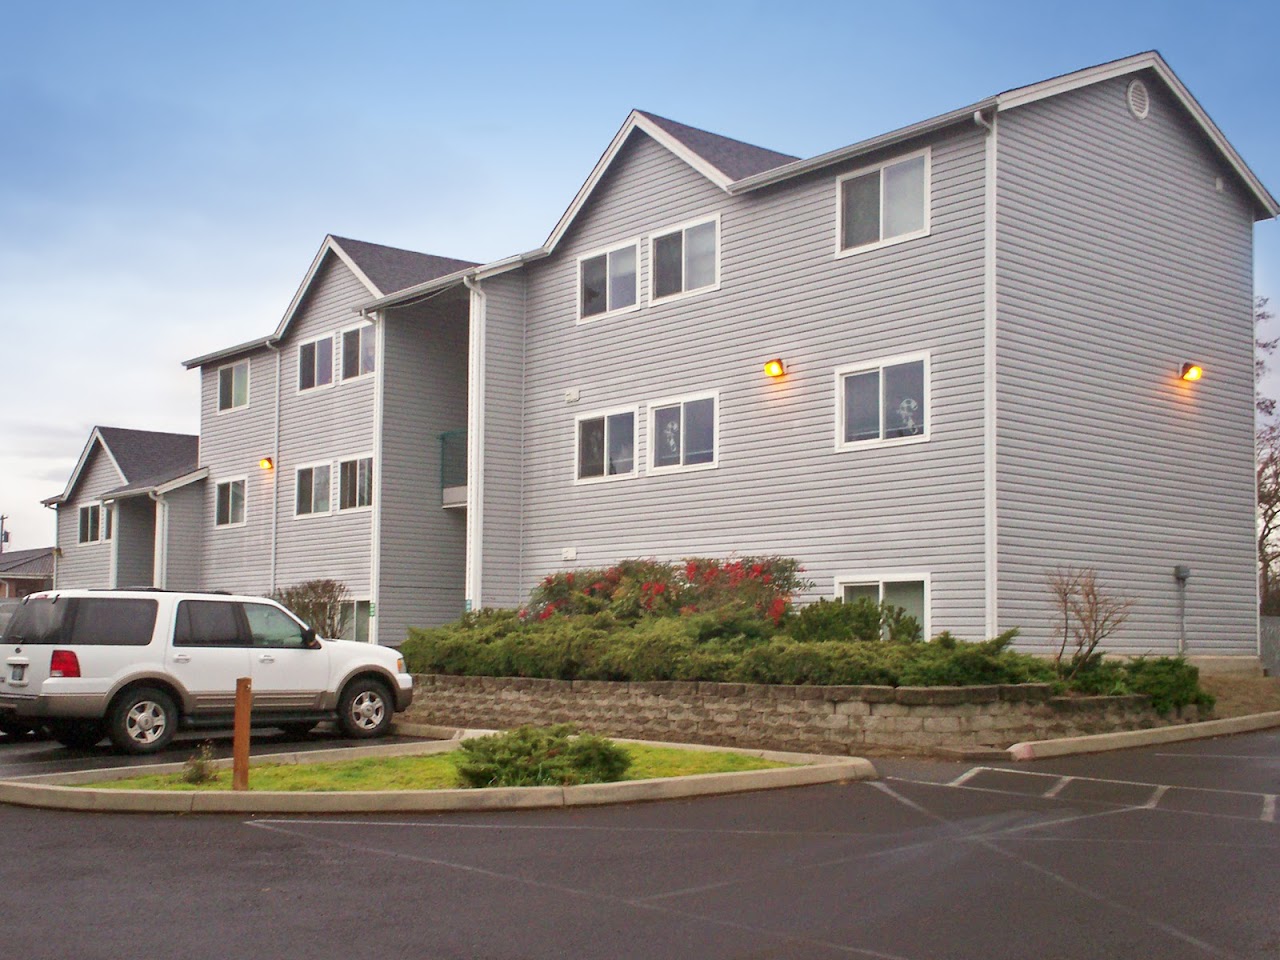 Photo of COTTONWOOD GLEN. Affordable housing located at 1371 FAIR STREET CLARKSTON, WA 99403